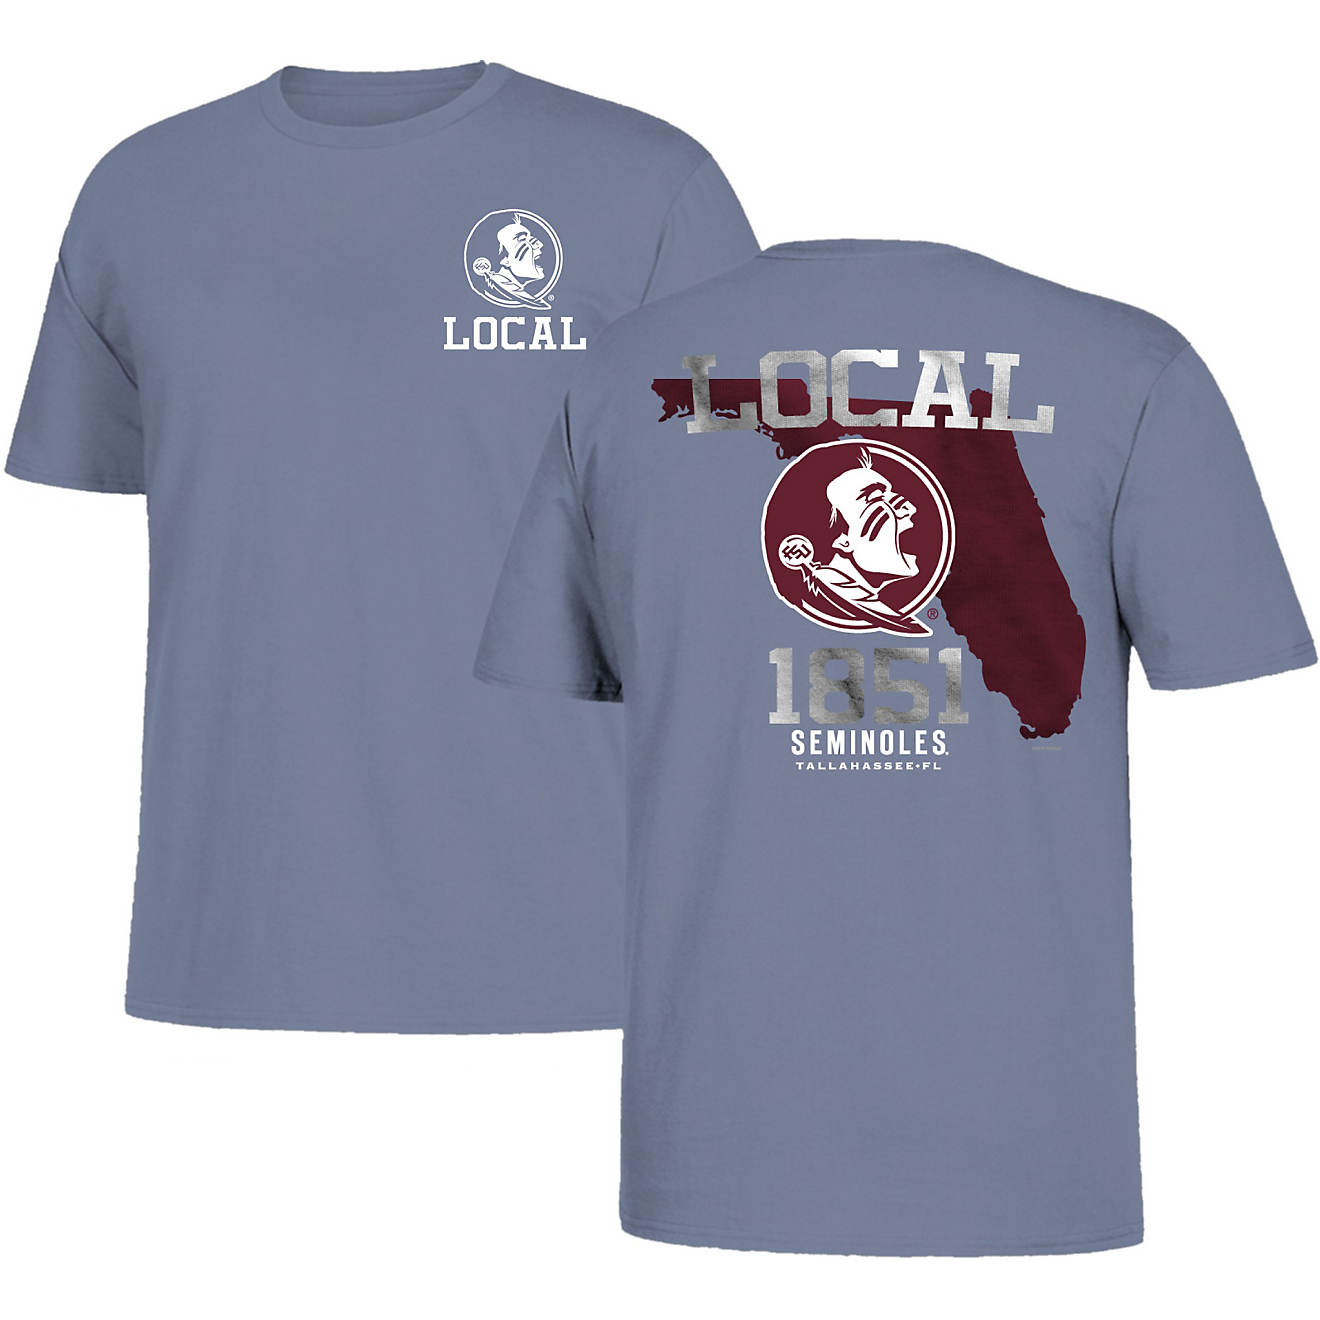 New World Graphics Men's Florida State University Local T-shirt                                                                  - view number 1